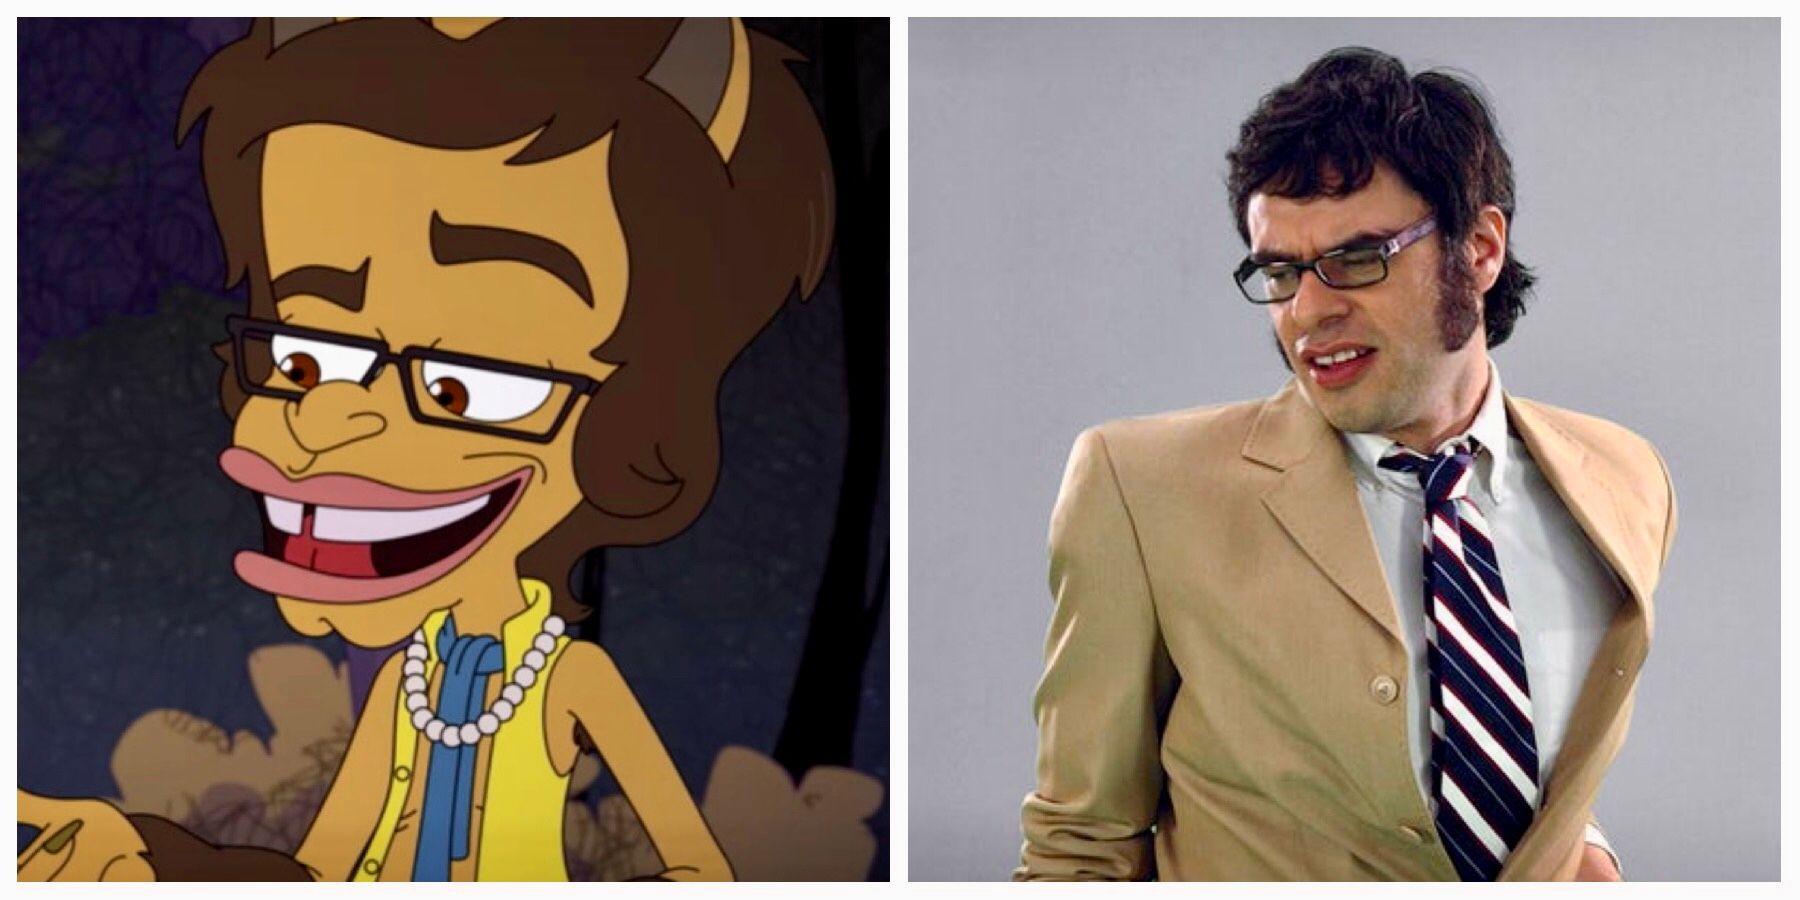 Jemaine Clement and Big Mouth’s Simon